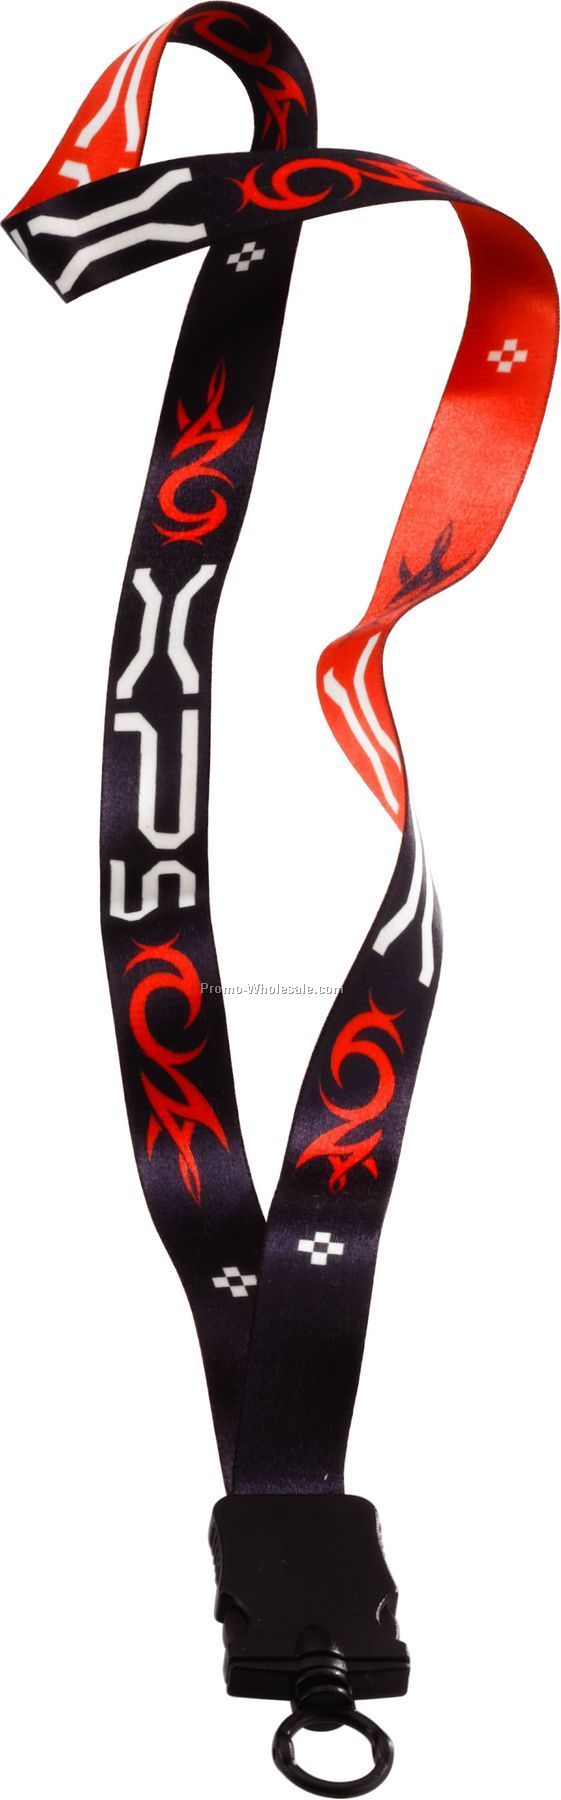 3/4" Recycled Dye Sublimated Lanyard With Snap Buckle Release & O-ring